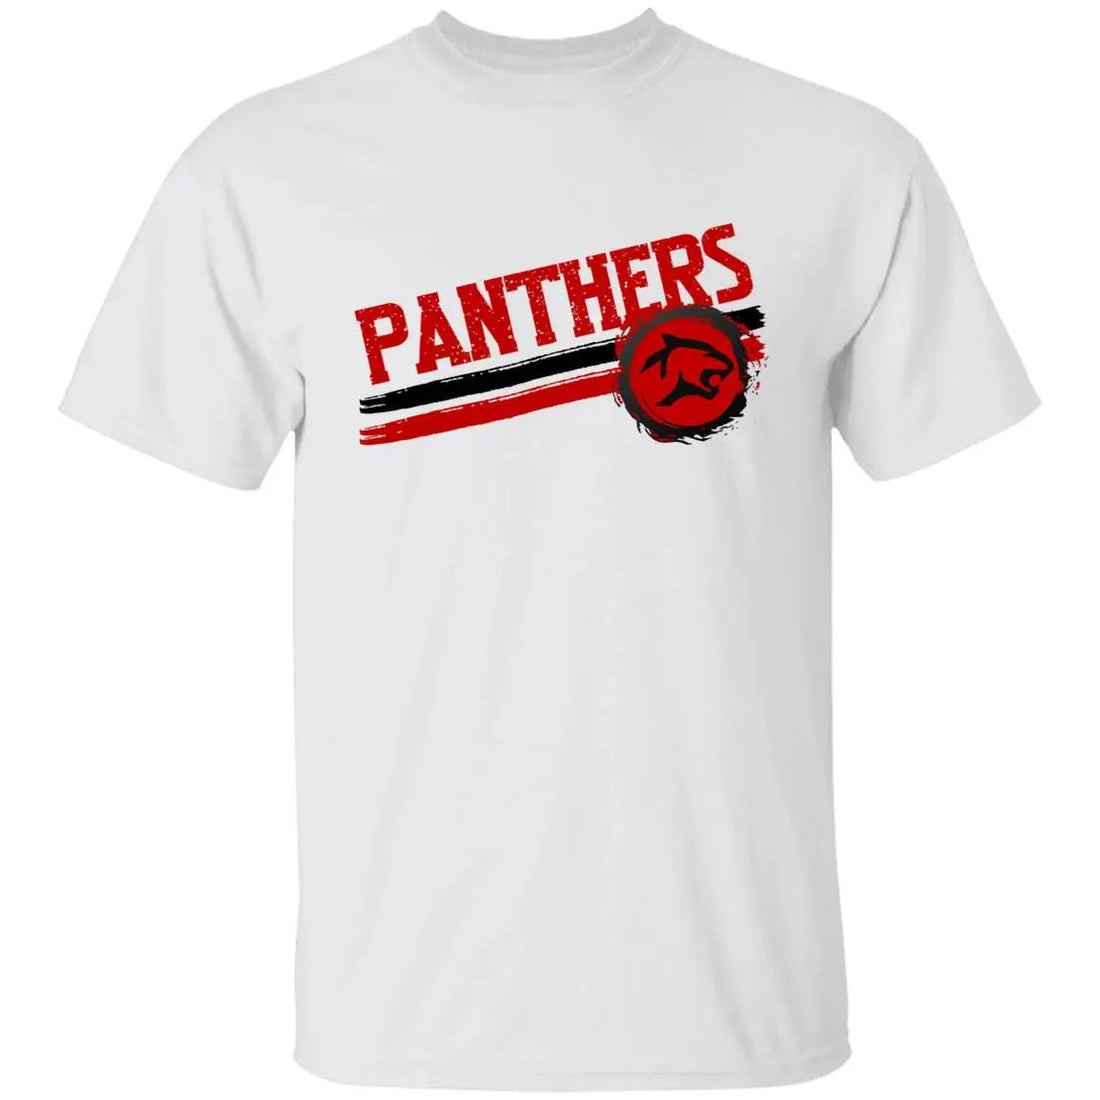 Youth Panther Red Bold Tee - T-Shirts - Positively Sassy - Youth Panther Red Bold Tee